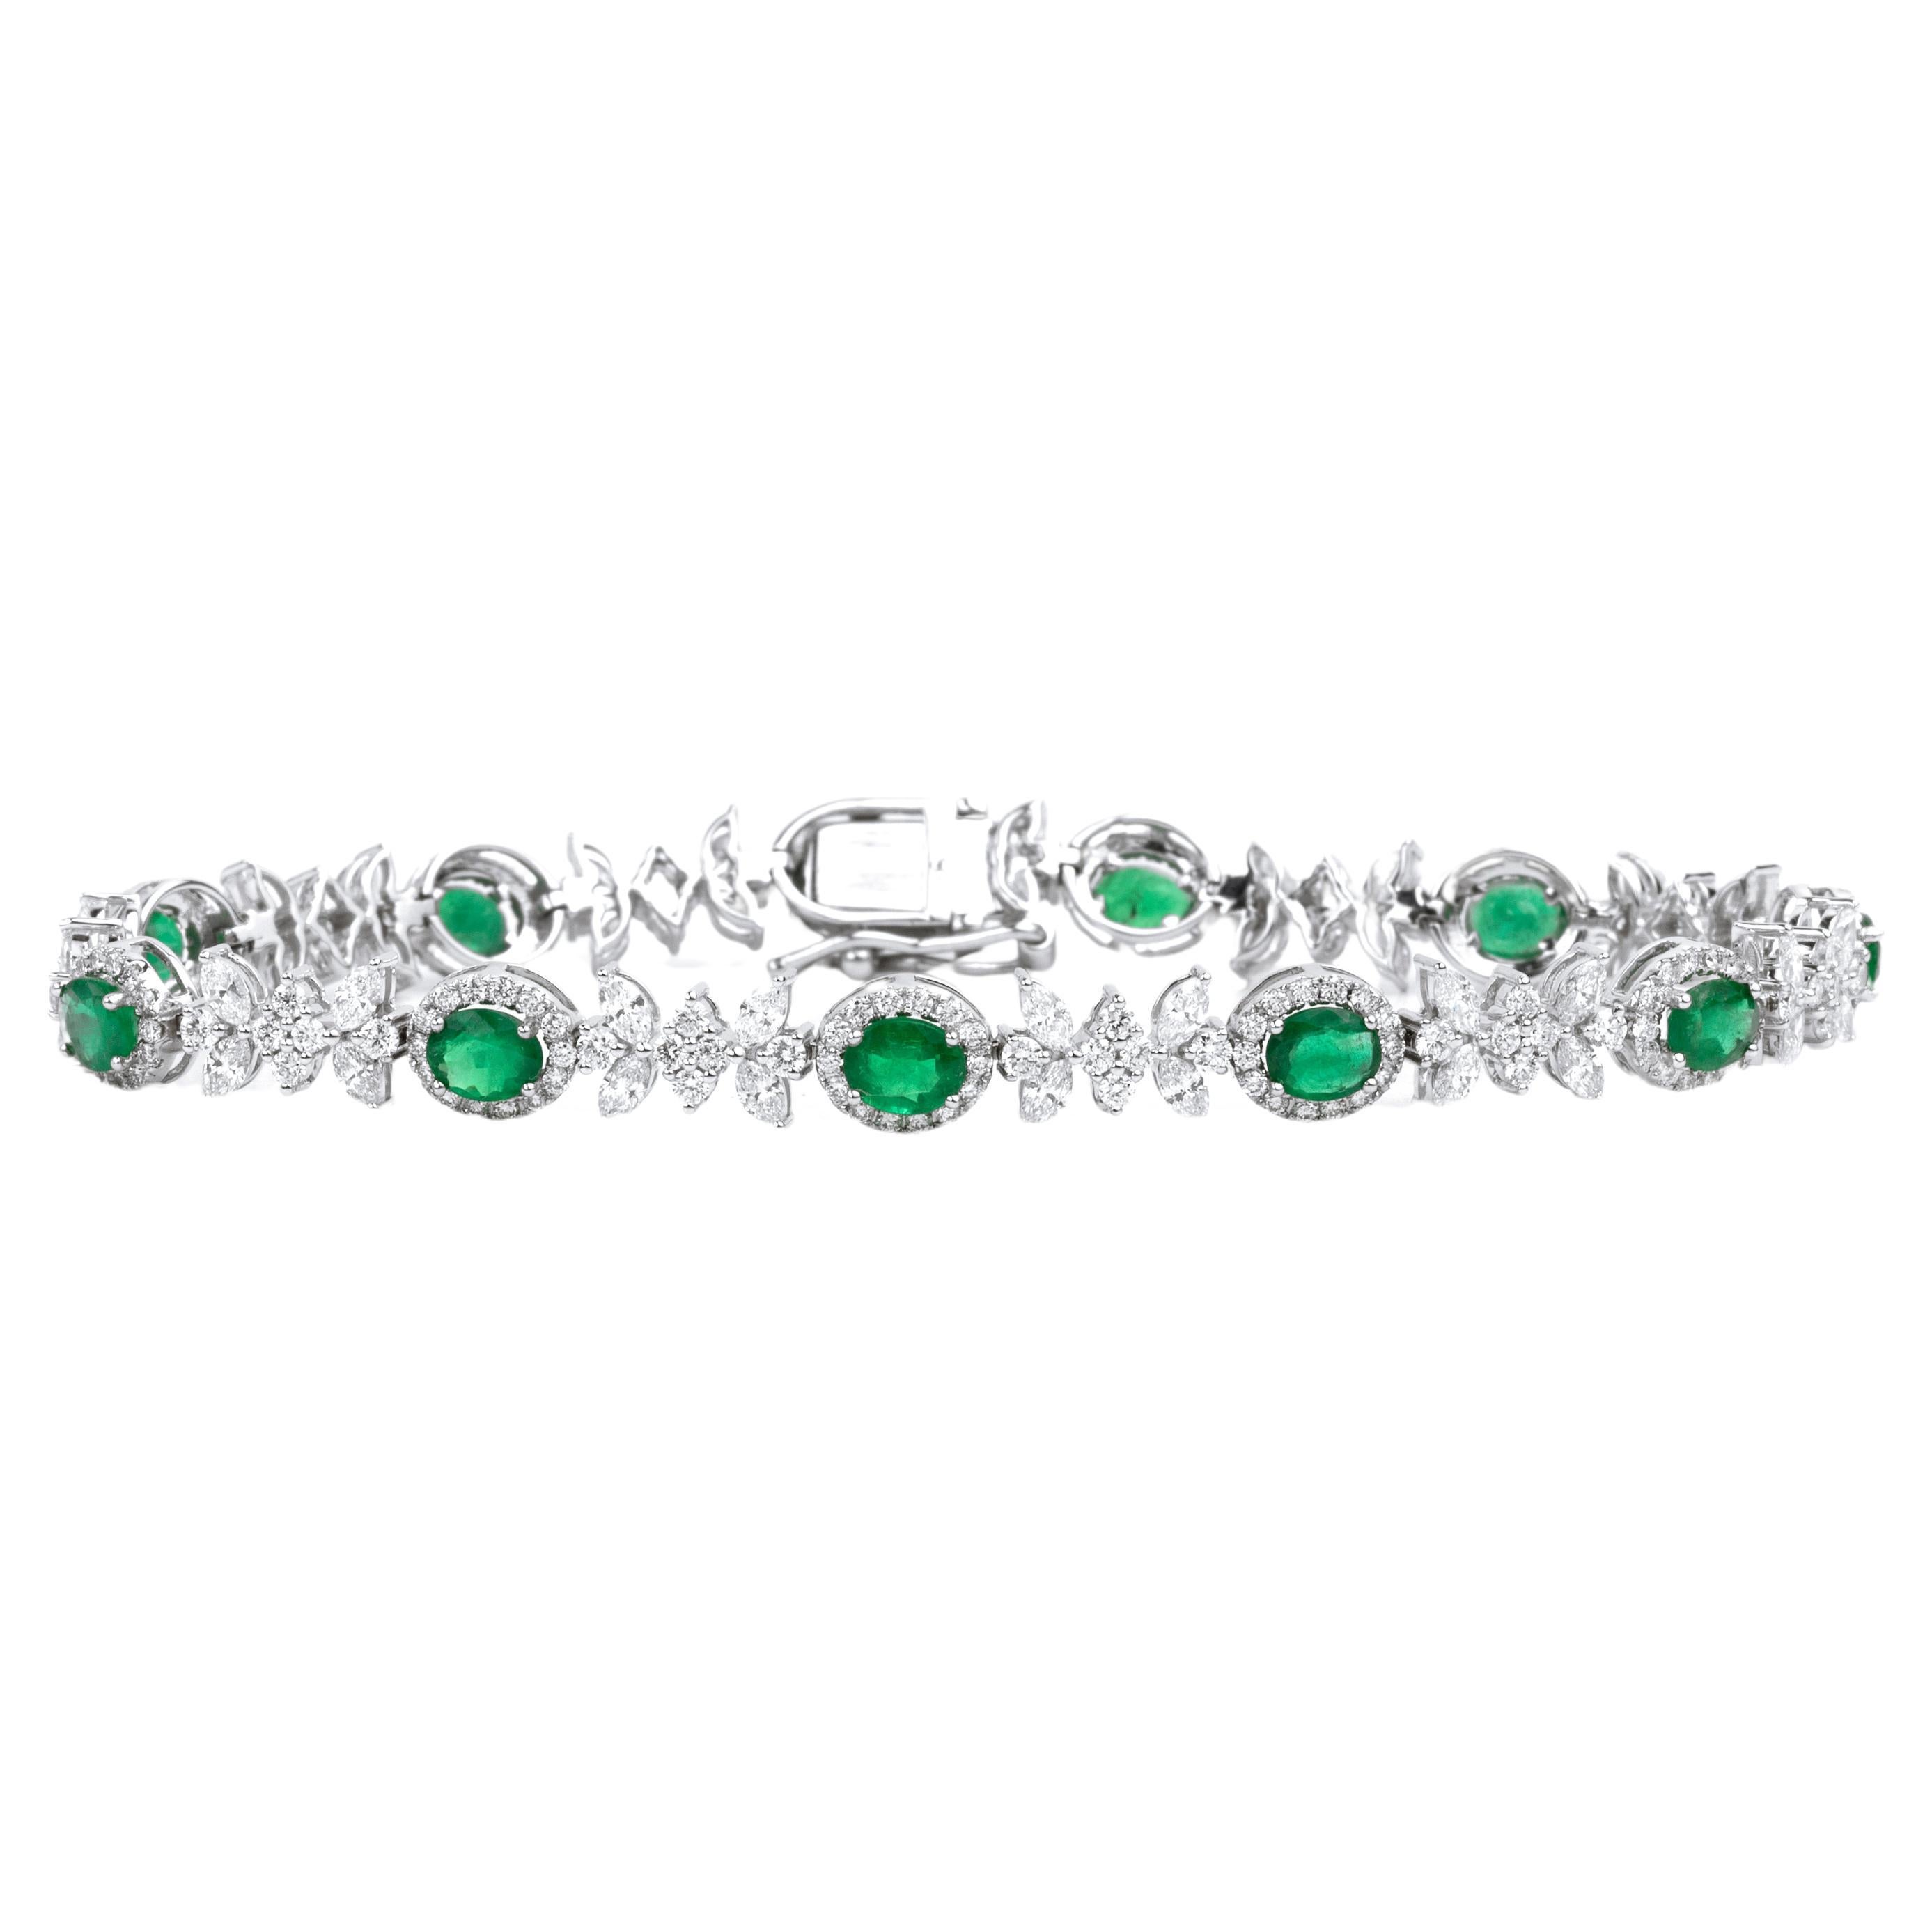 Exceptional 4.5 Ct Oval Cut Natural Emerald Bracelet with diamond 18k White Gold